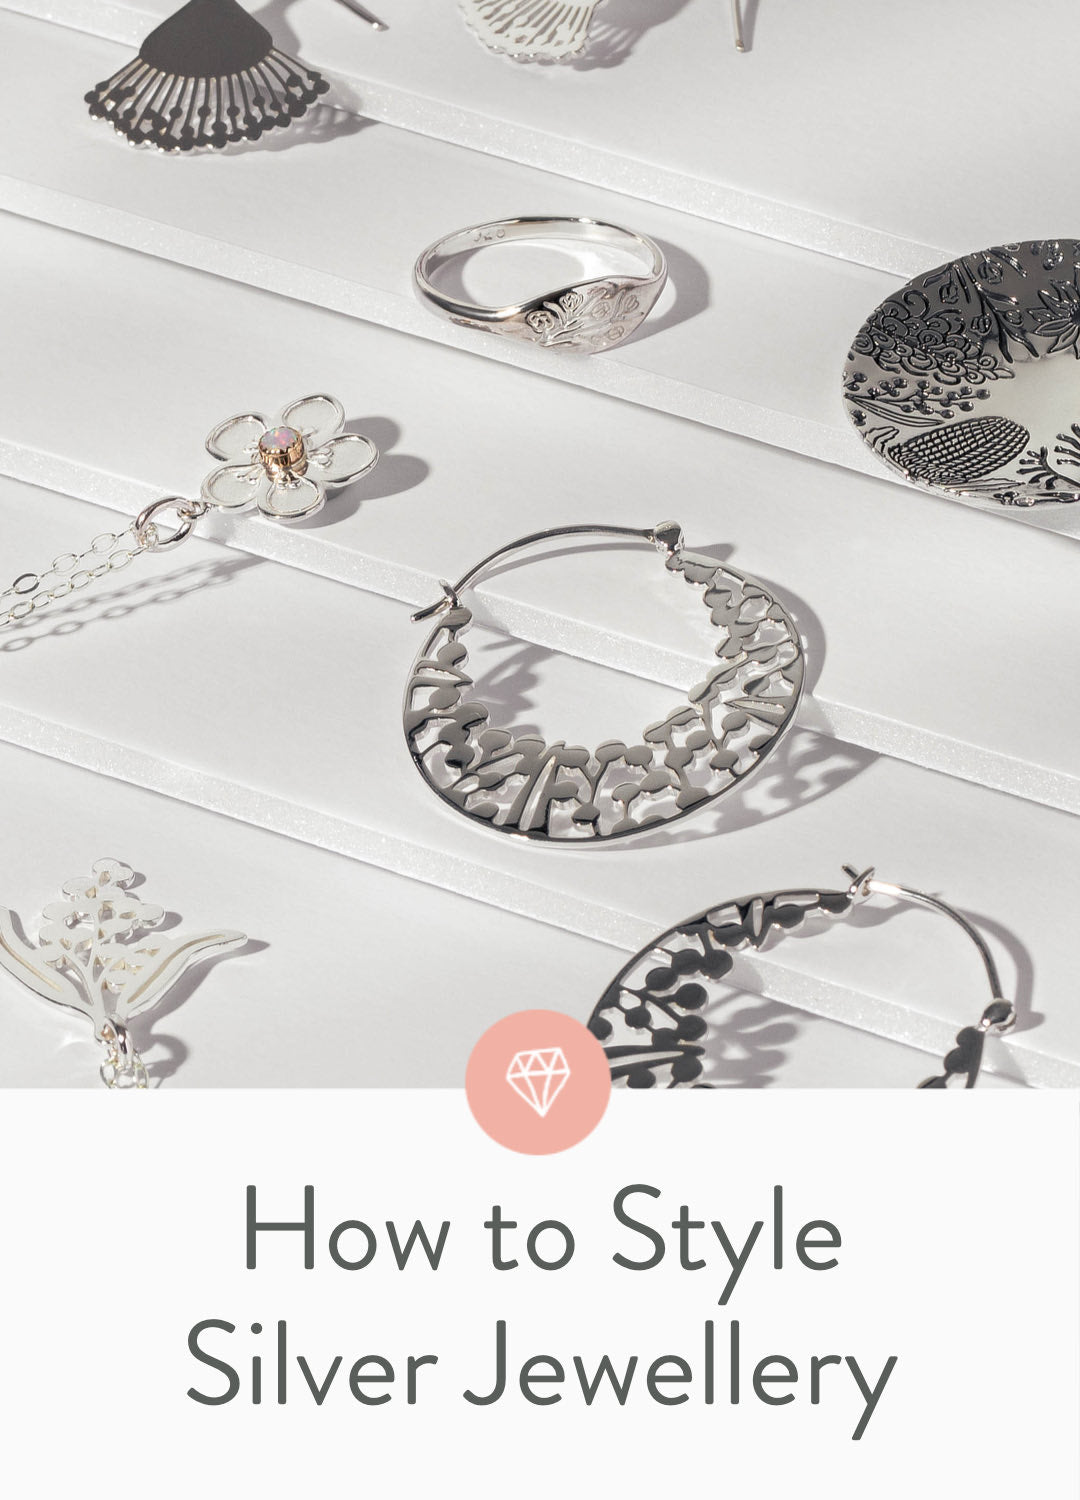 How to style silver jewellery and accessories